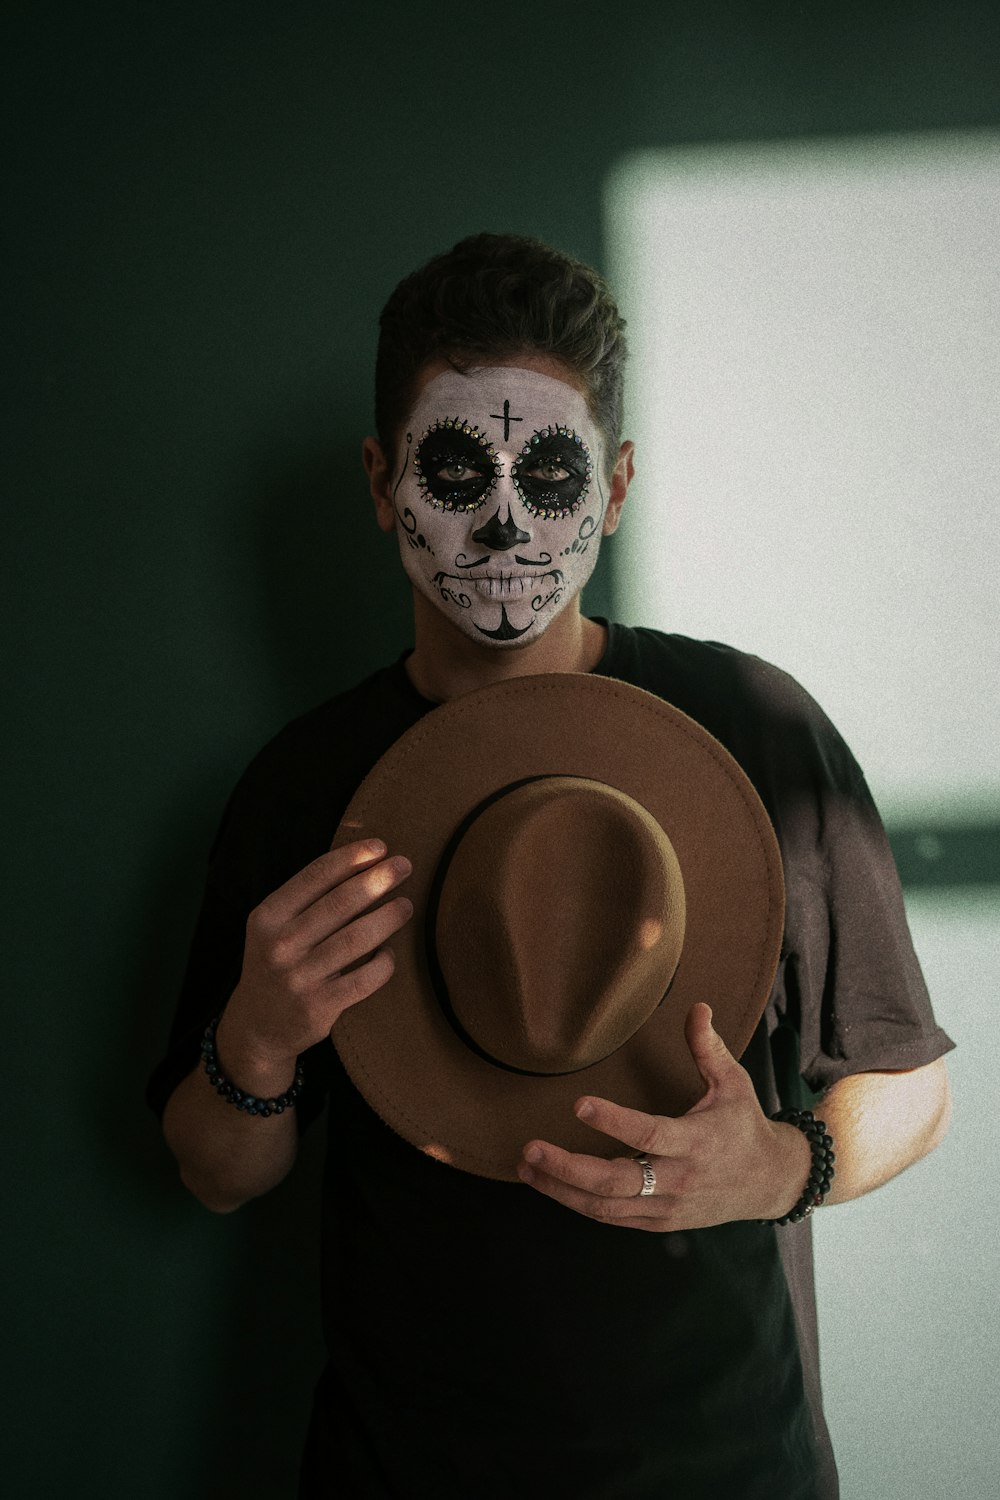 a man wearing a skeleton face paint holding a hat